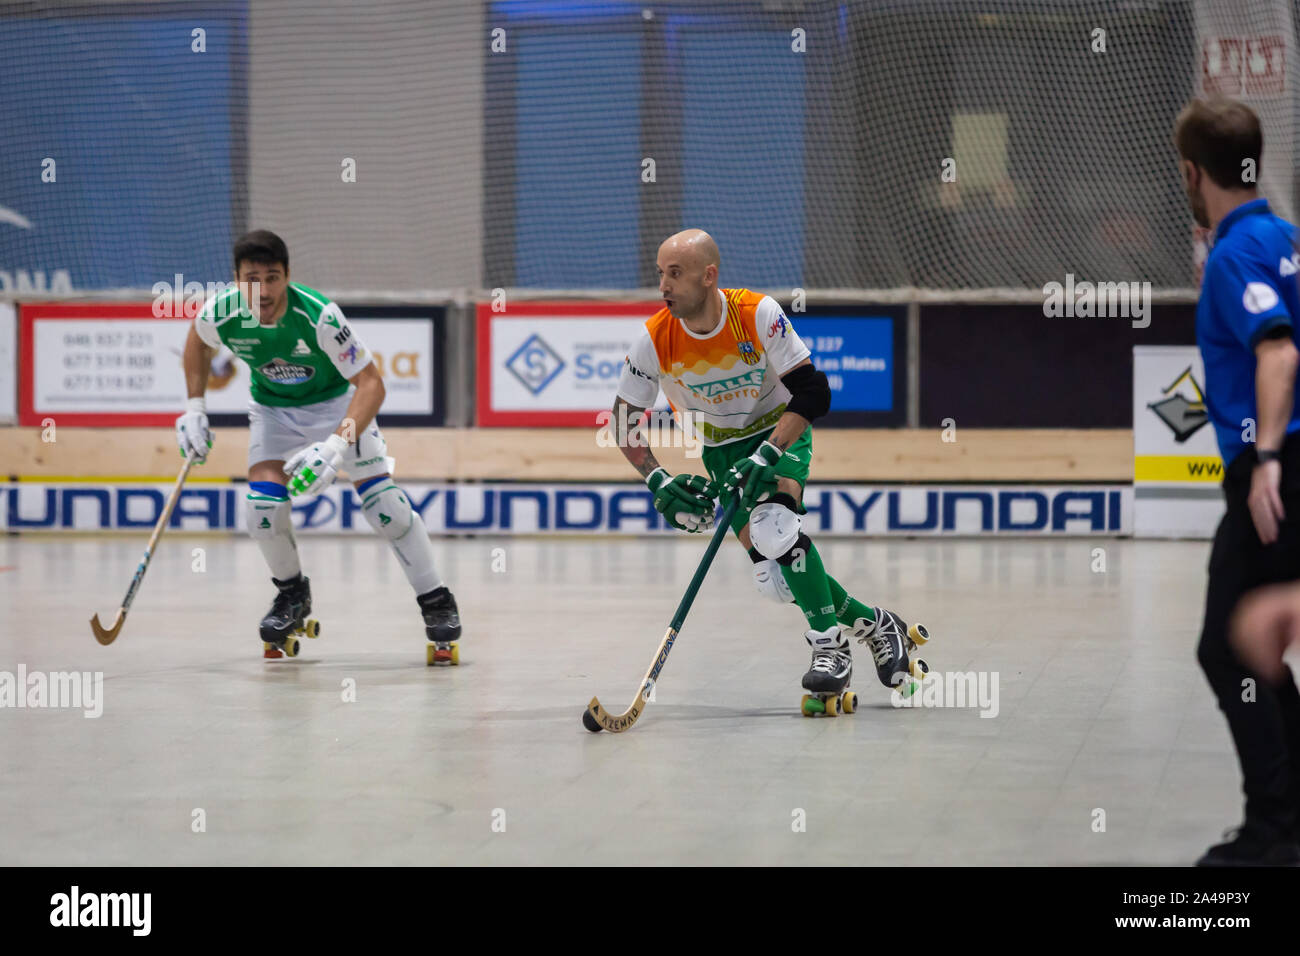 Angel Rodriguez Rojas roller hockey player of CP Calafell and Maximiliano Oruste Salva roller hockey player of Deportivo Liceo in action at Spanish OK Stock Photo